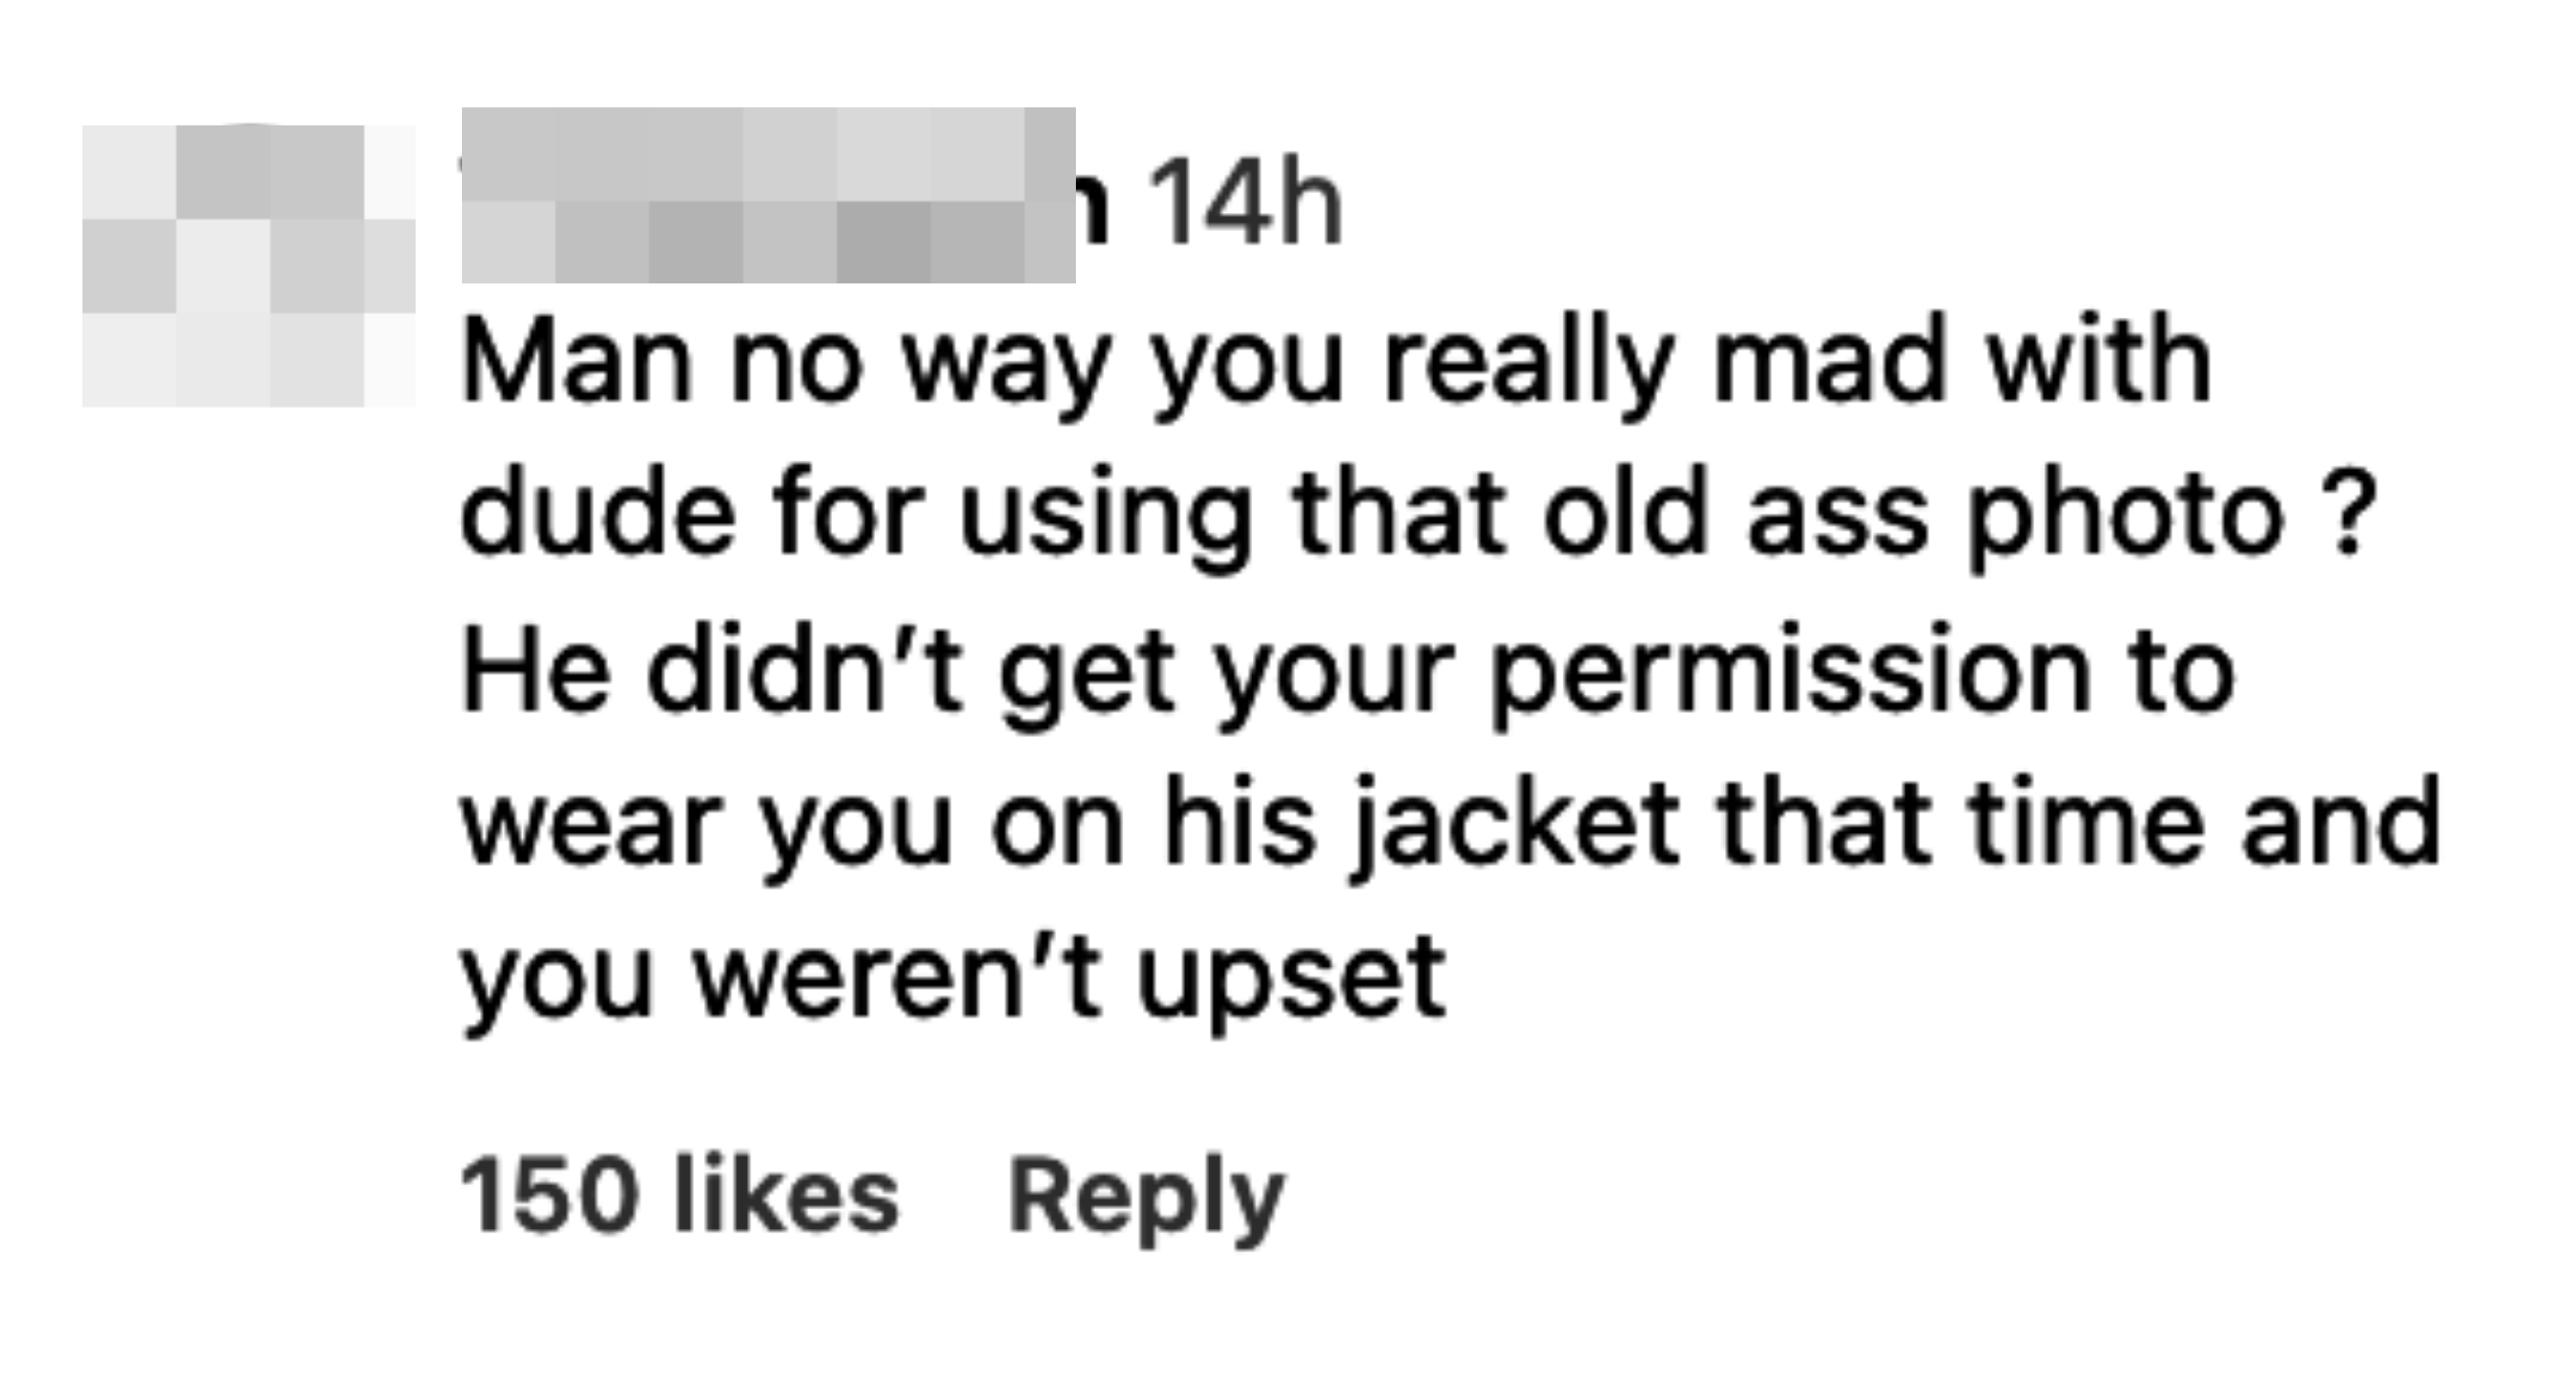 man no way you really mad with dude for using that old ass photo